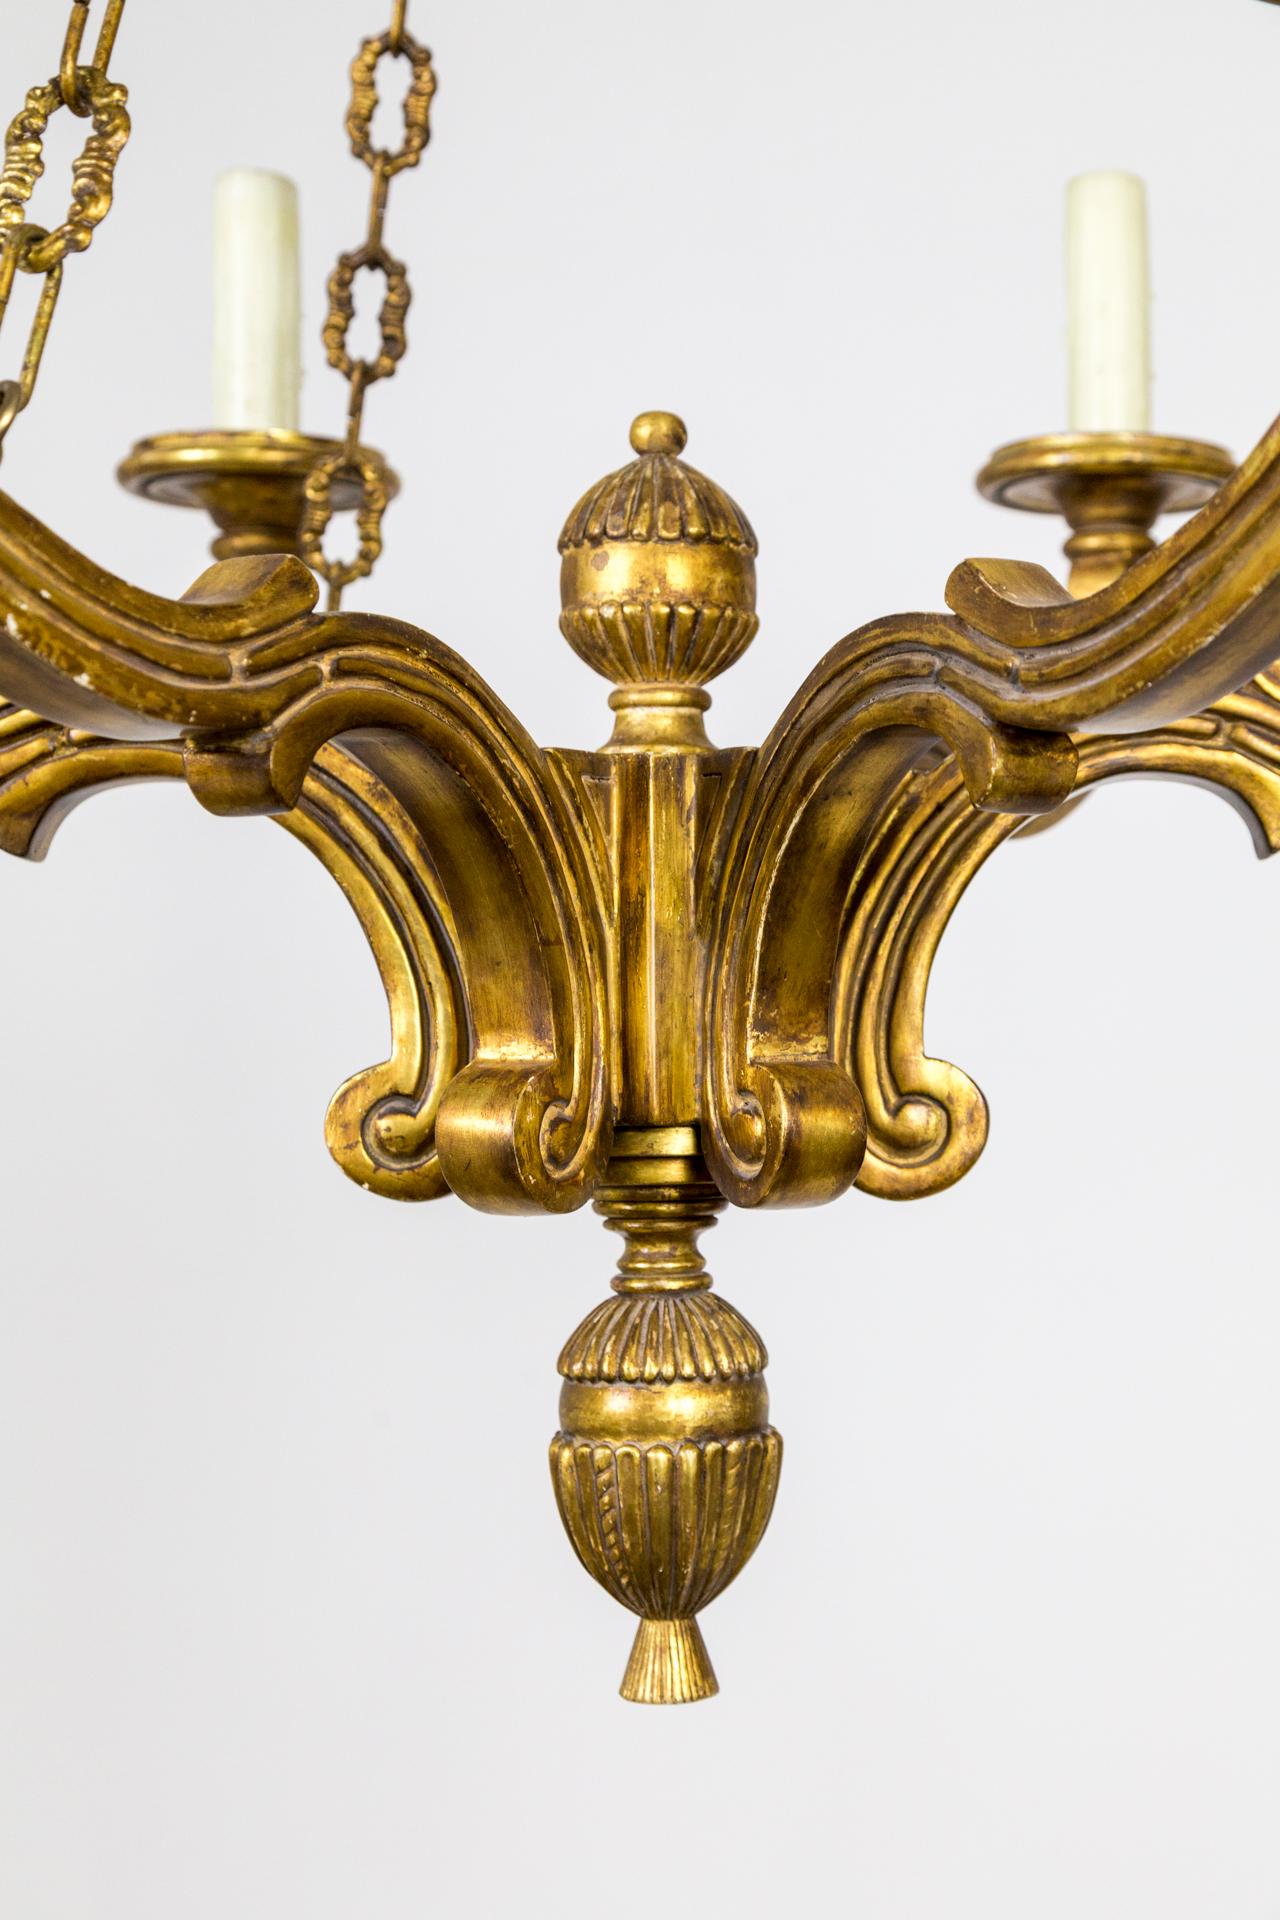 American Panache Designs for Michael Taylor, 6 Arm Regency Chandelier 2 Available For Sale